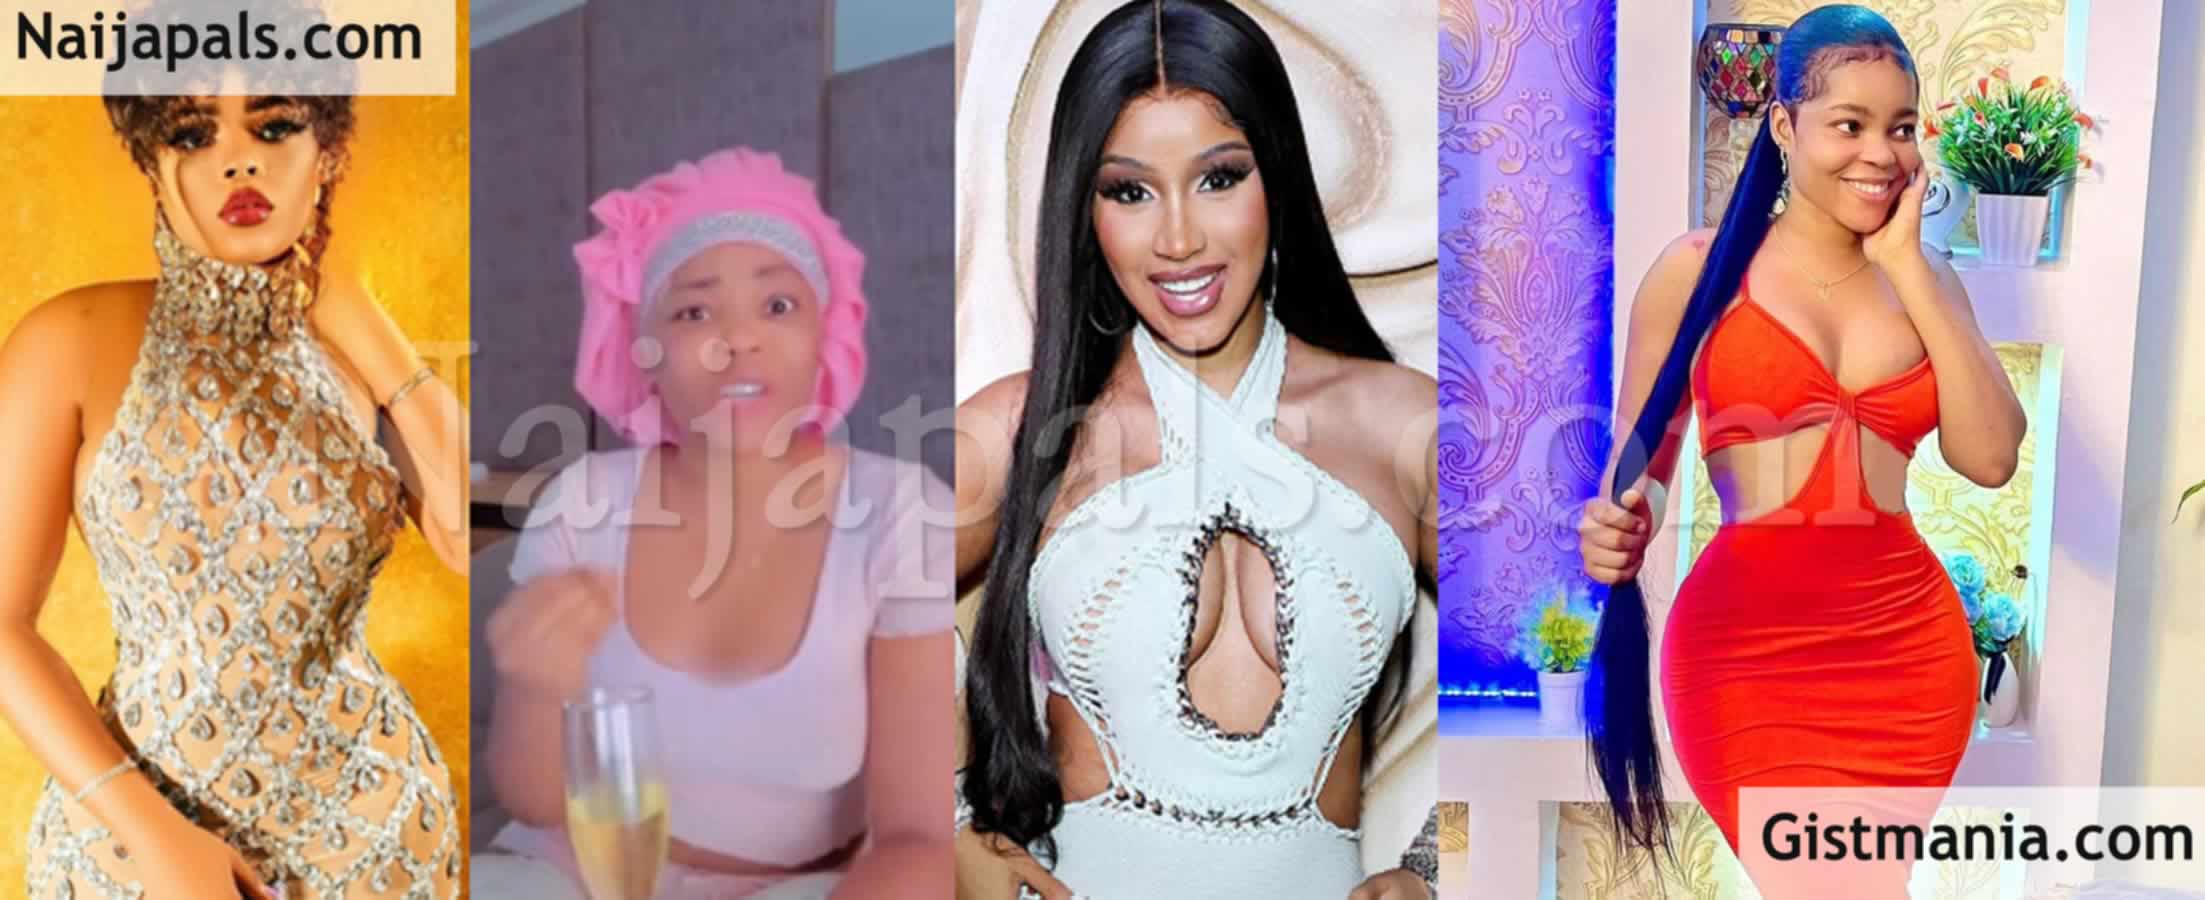 I Have No Regrets Being a Stripper – BBNaija Chichi Excited As Cardi B Replies to Her Post